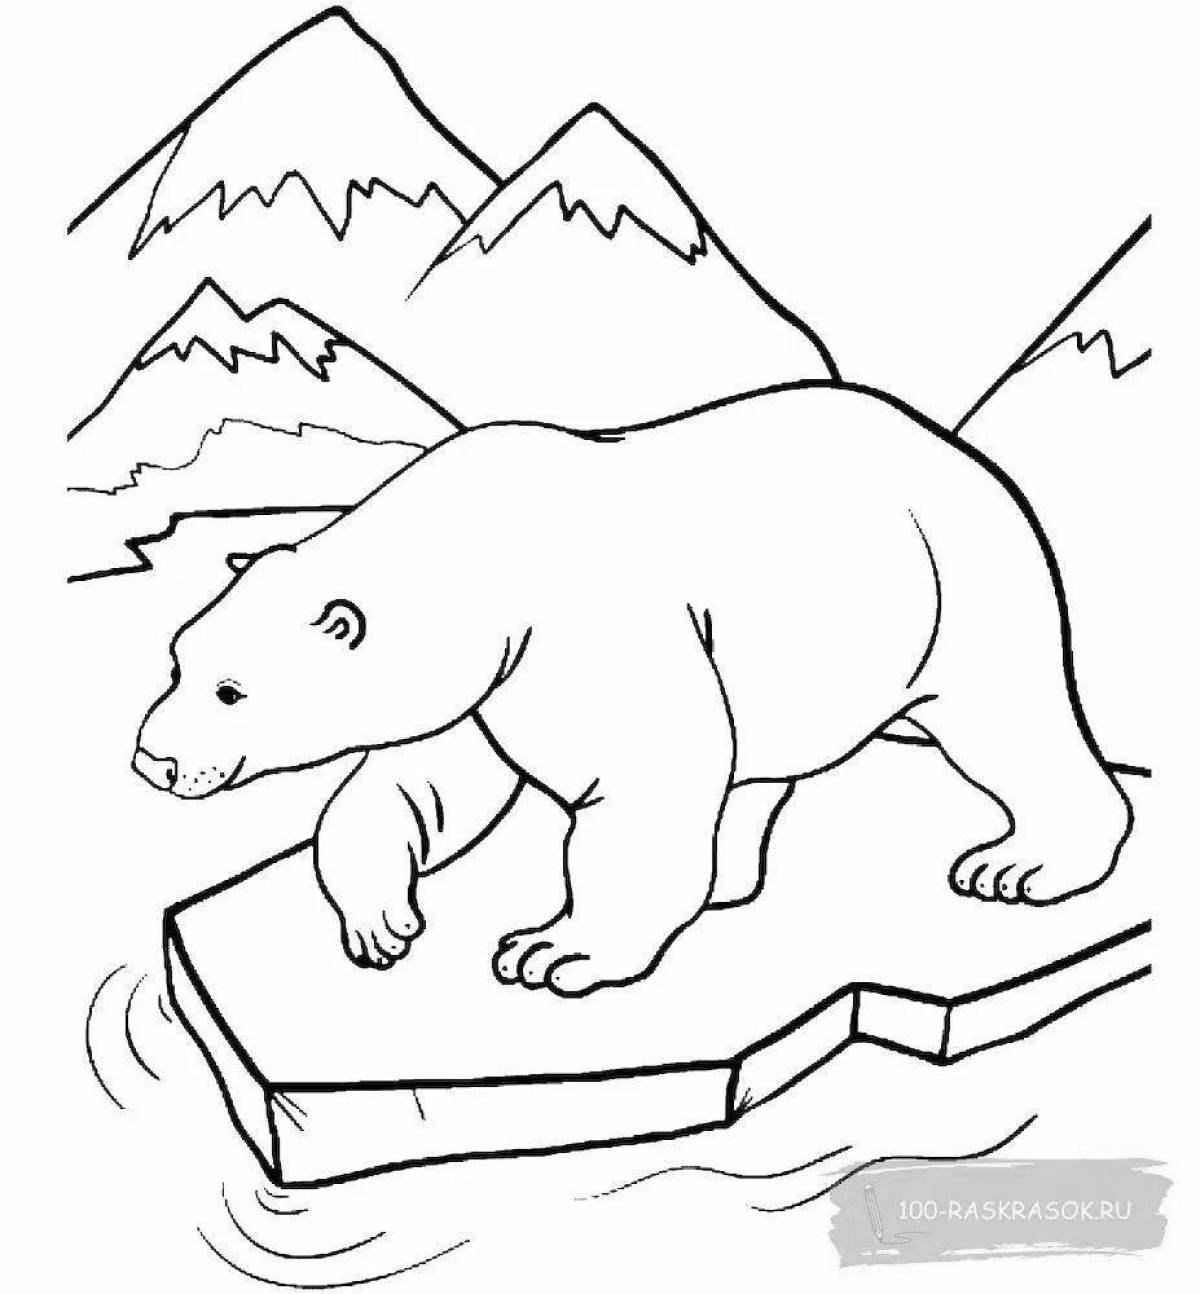 Colorful polar bear coloring page for toddlers